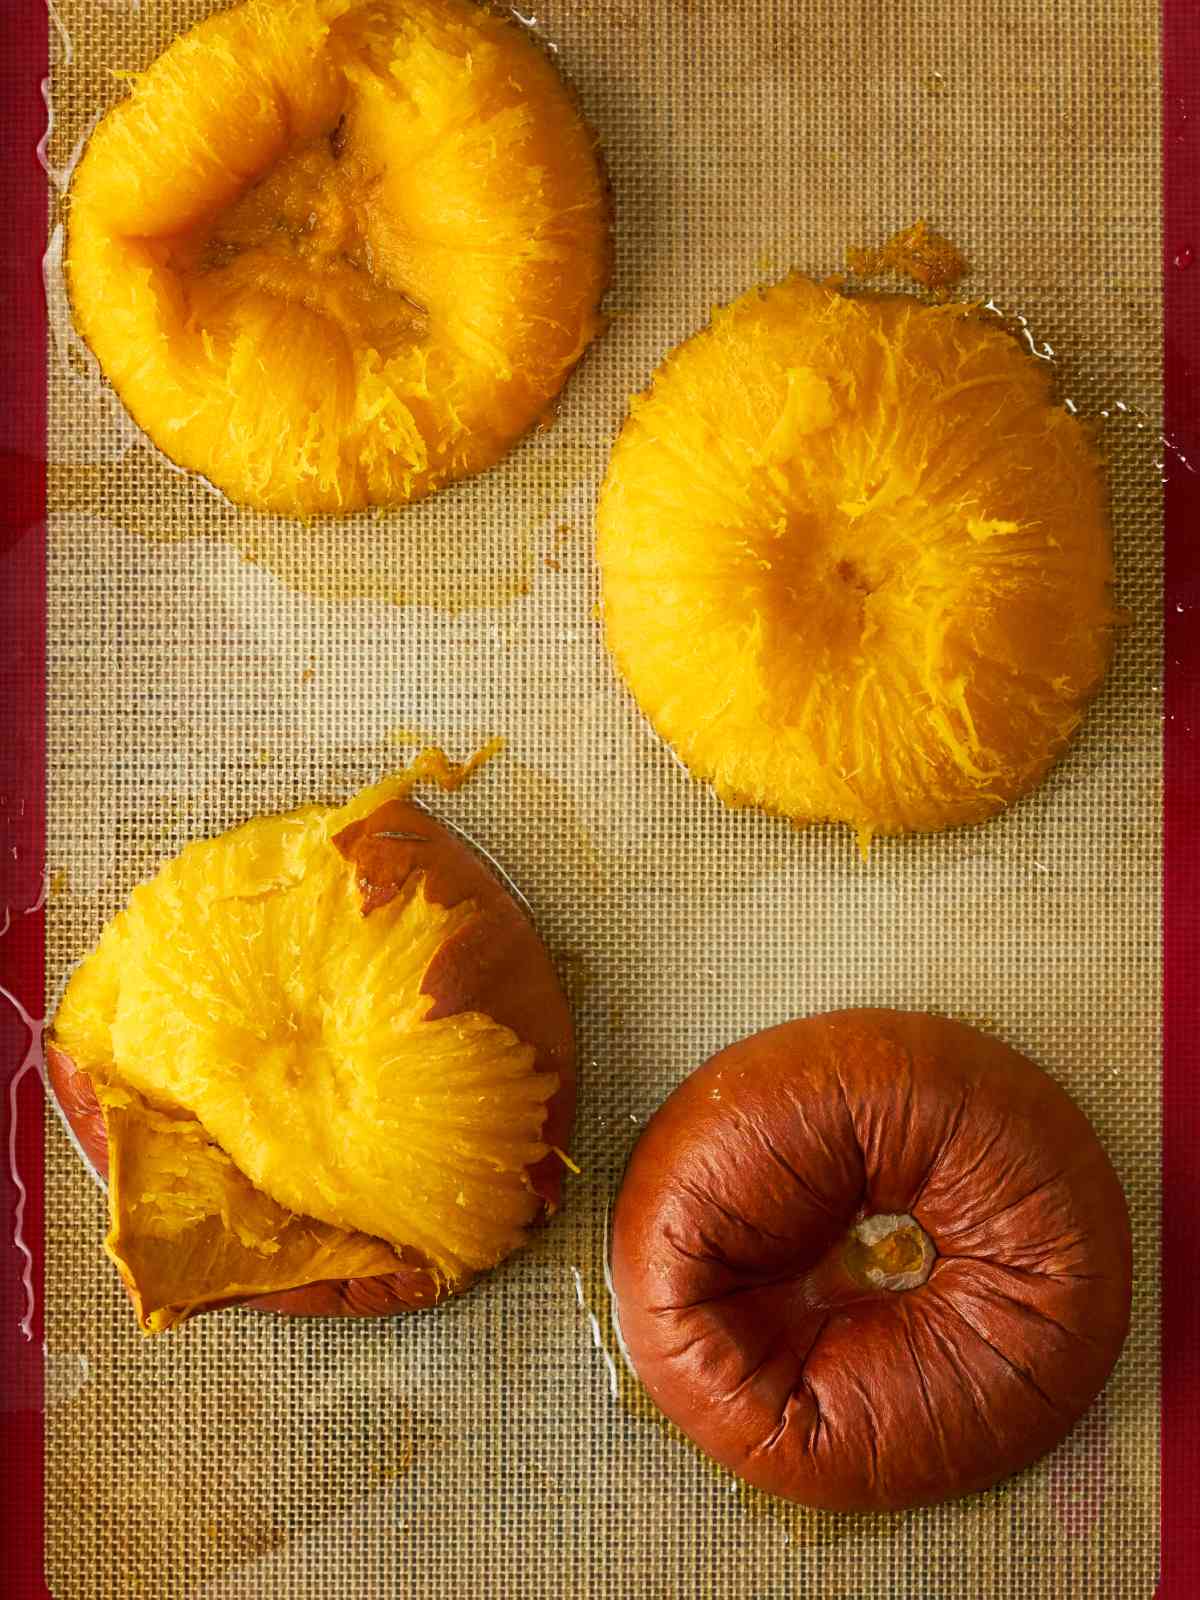 Four peeled and cooked pumpkin halves cut side down on a silicone baking sheet.